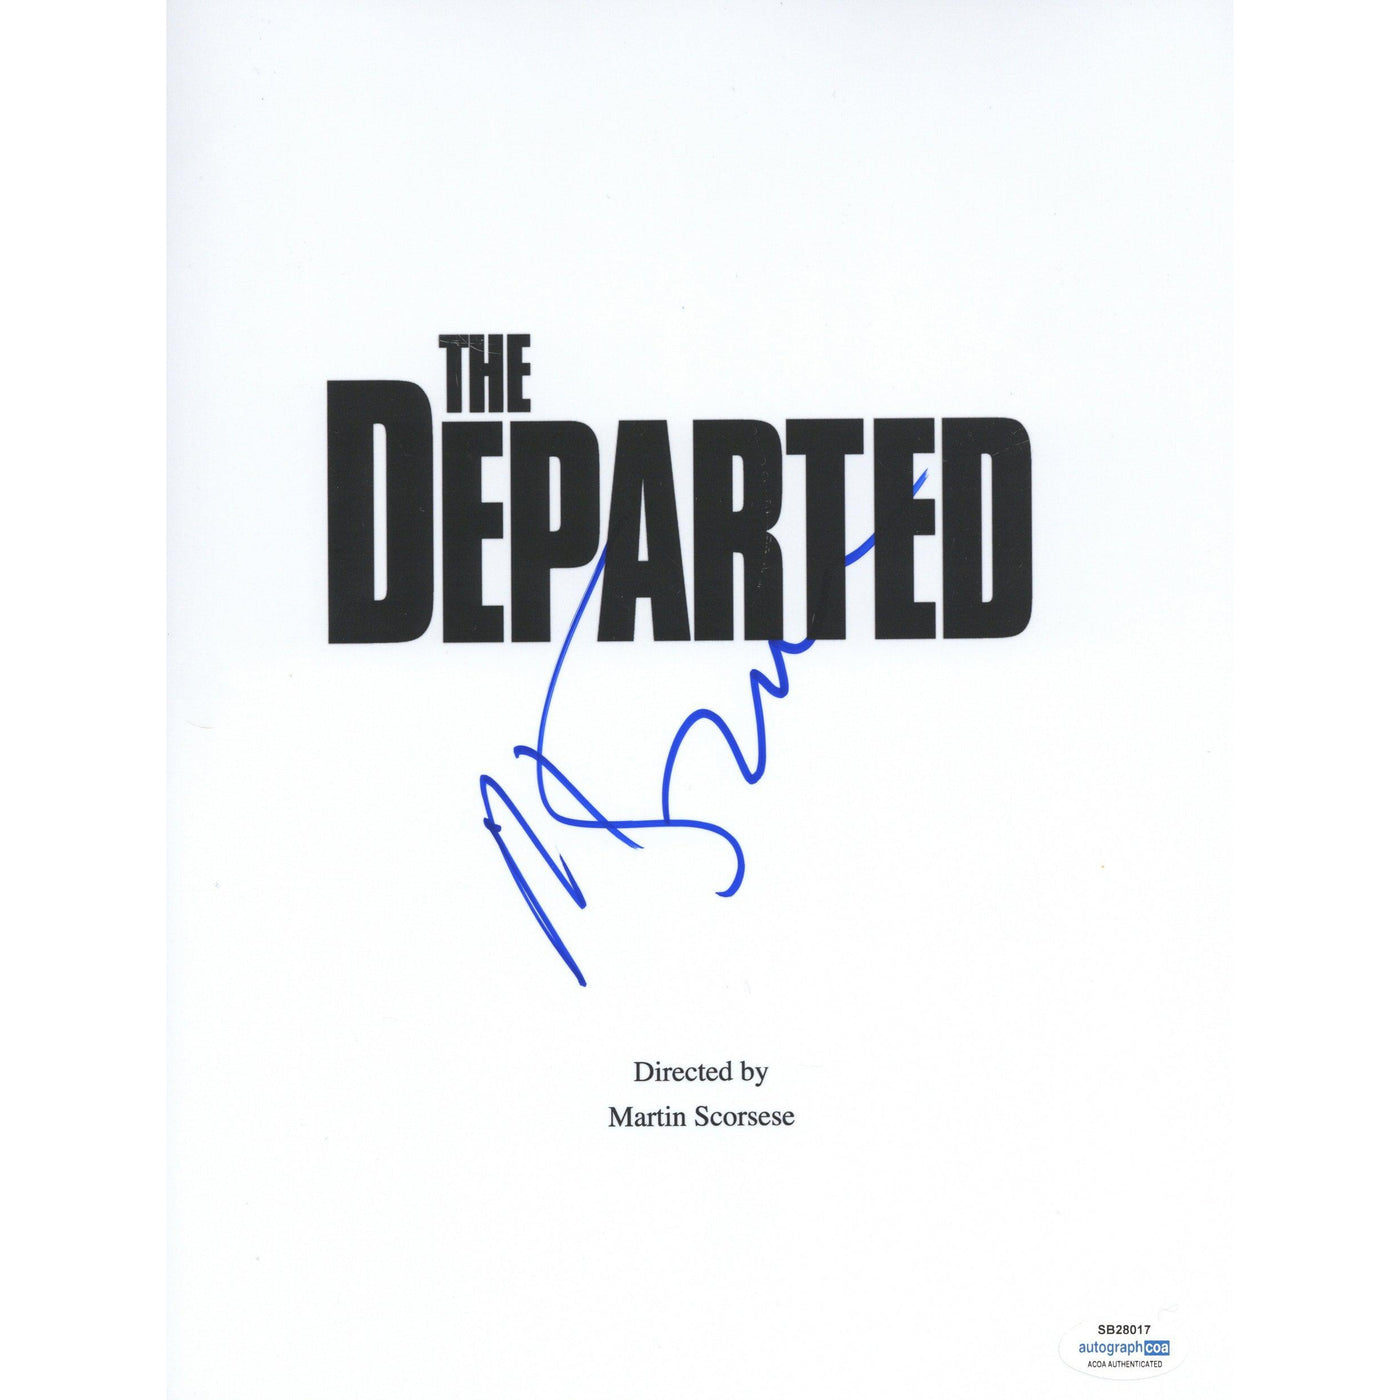 Martin Scorsese Signed Movie Script Cover The Departed Autographed ACOA